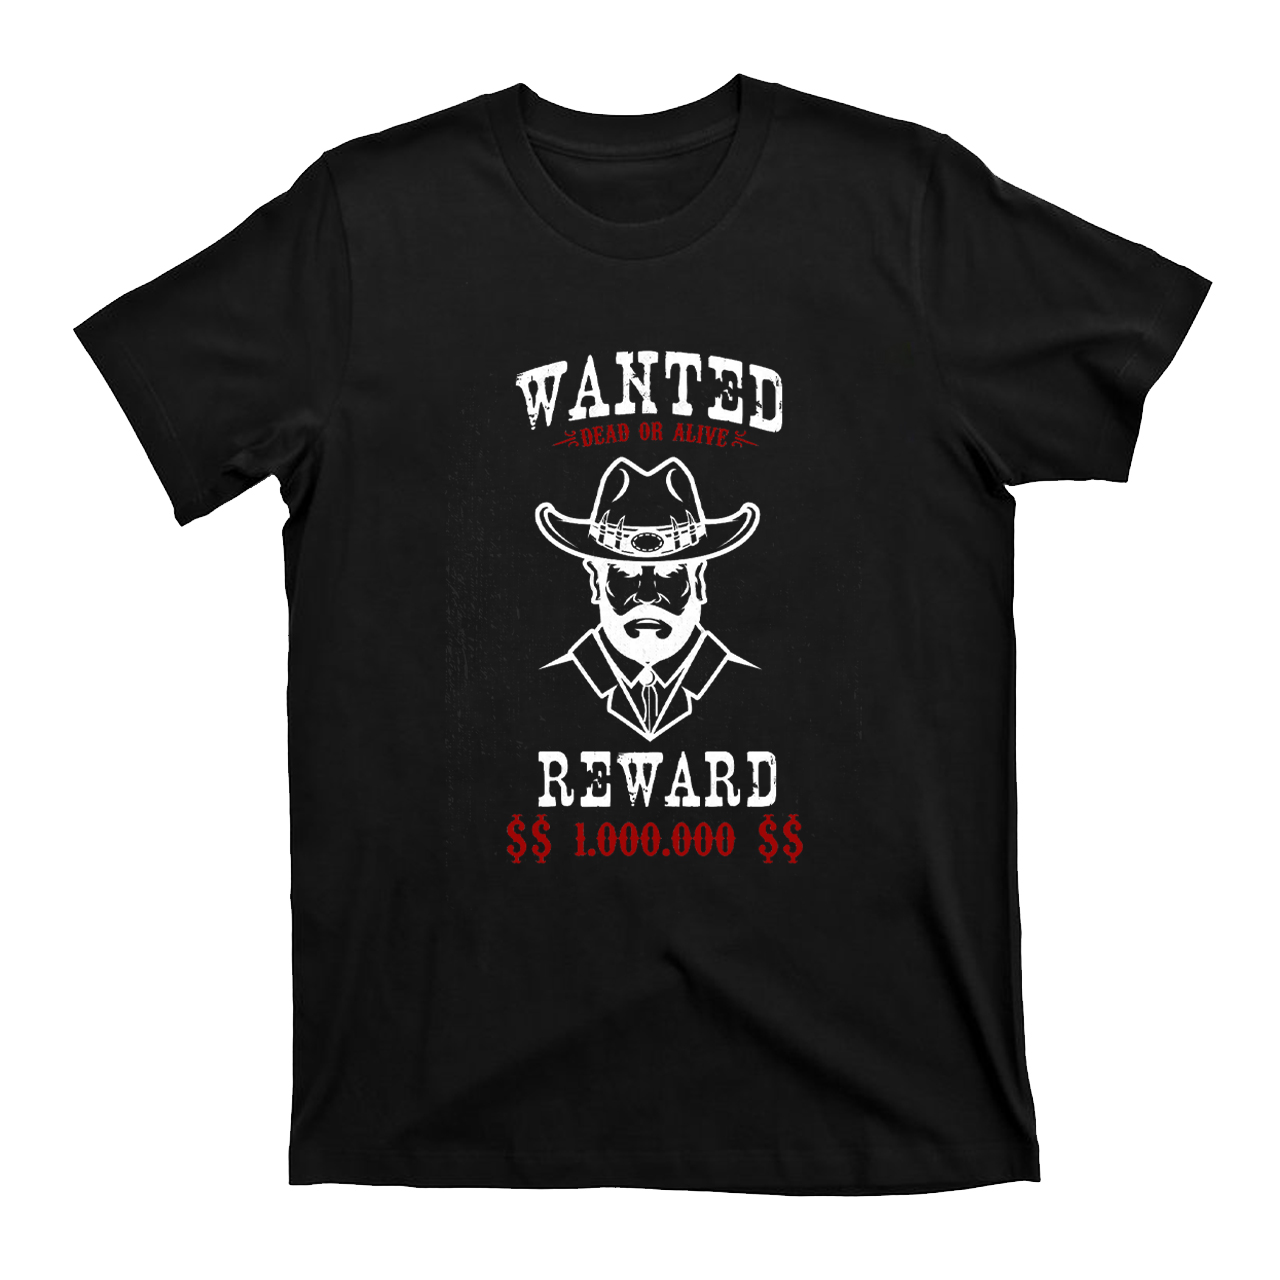 Wanted Dead or Alive Reward $1.000.000 T-Shirts